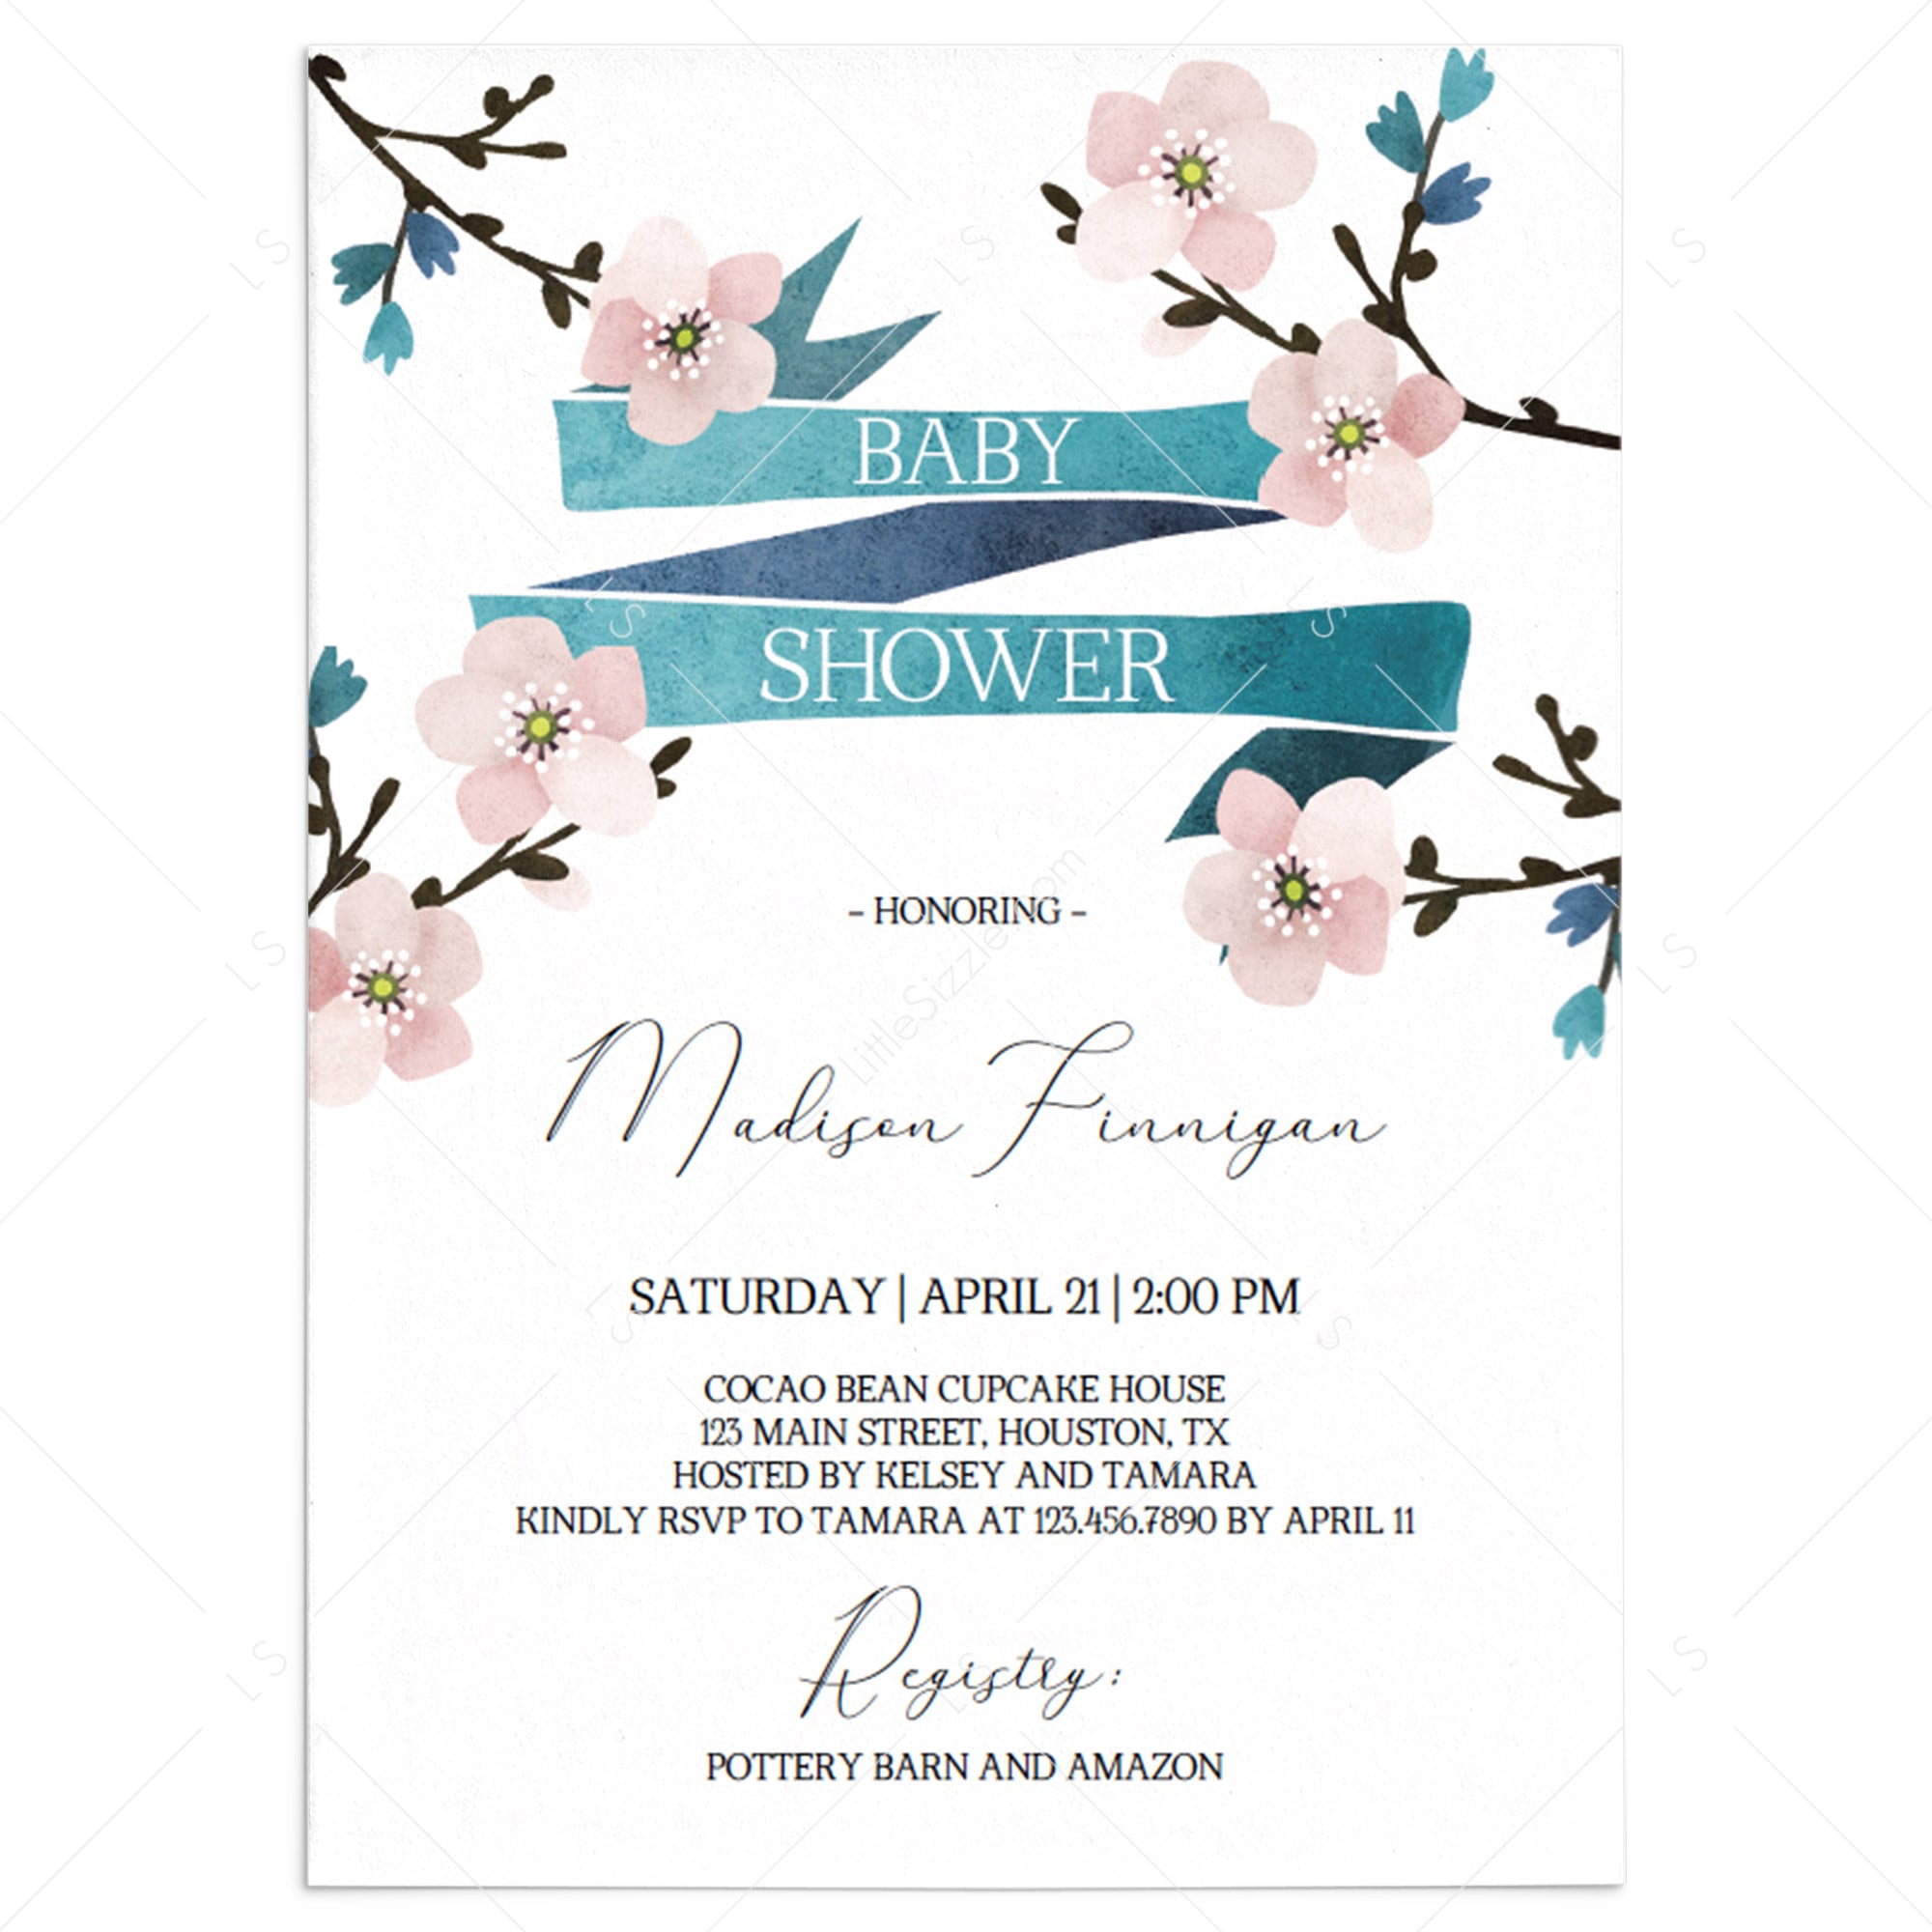 Floral baby shower invitation cherry blossom by LittleSizzle